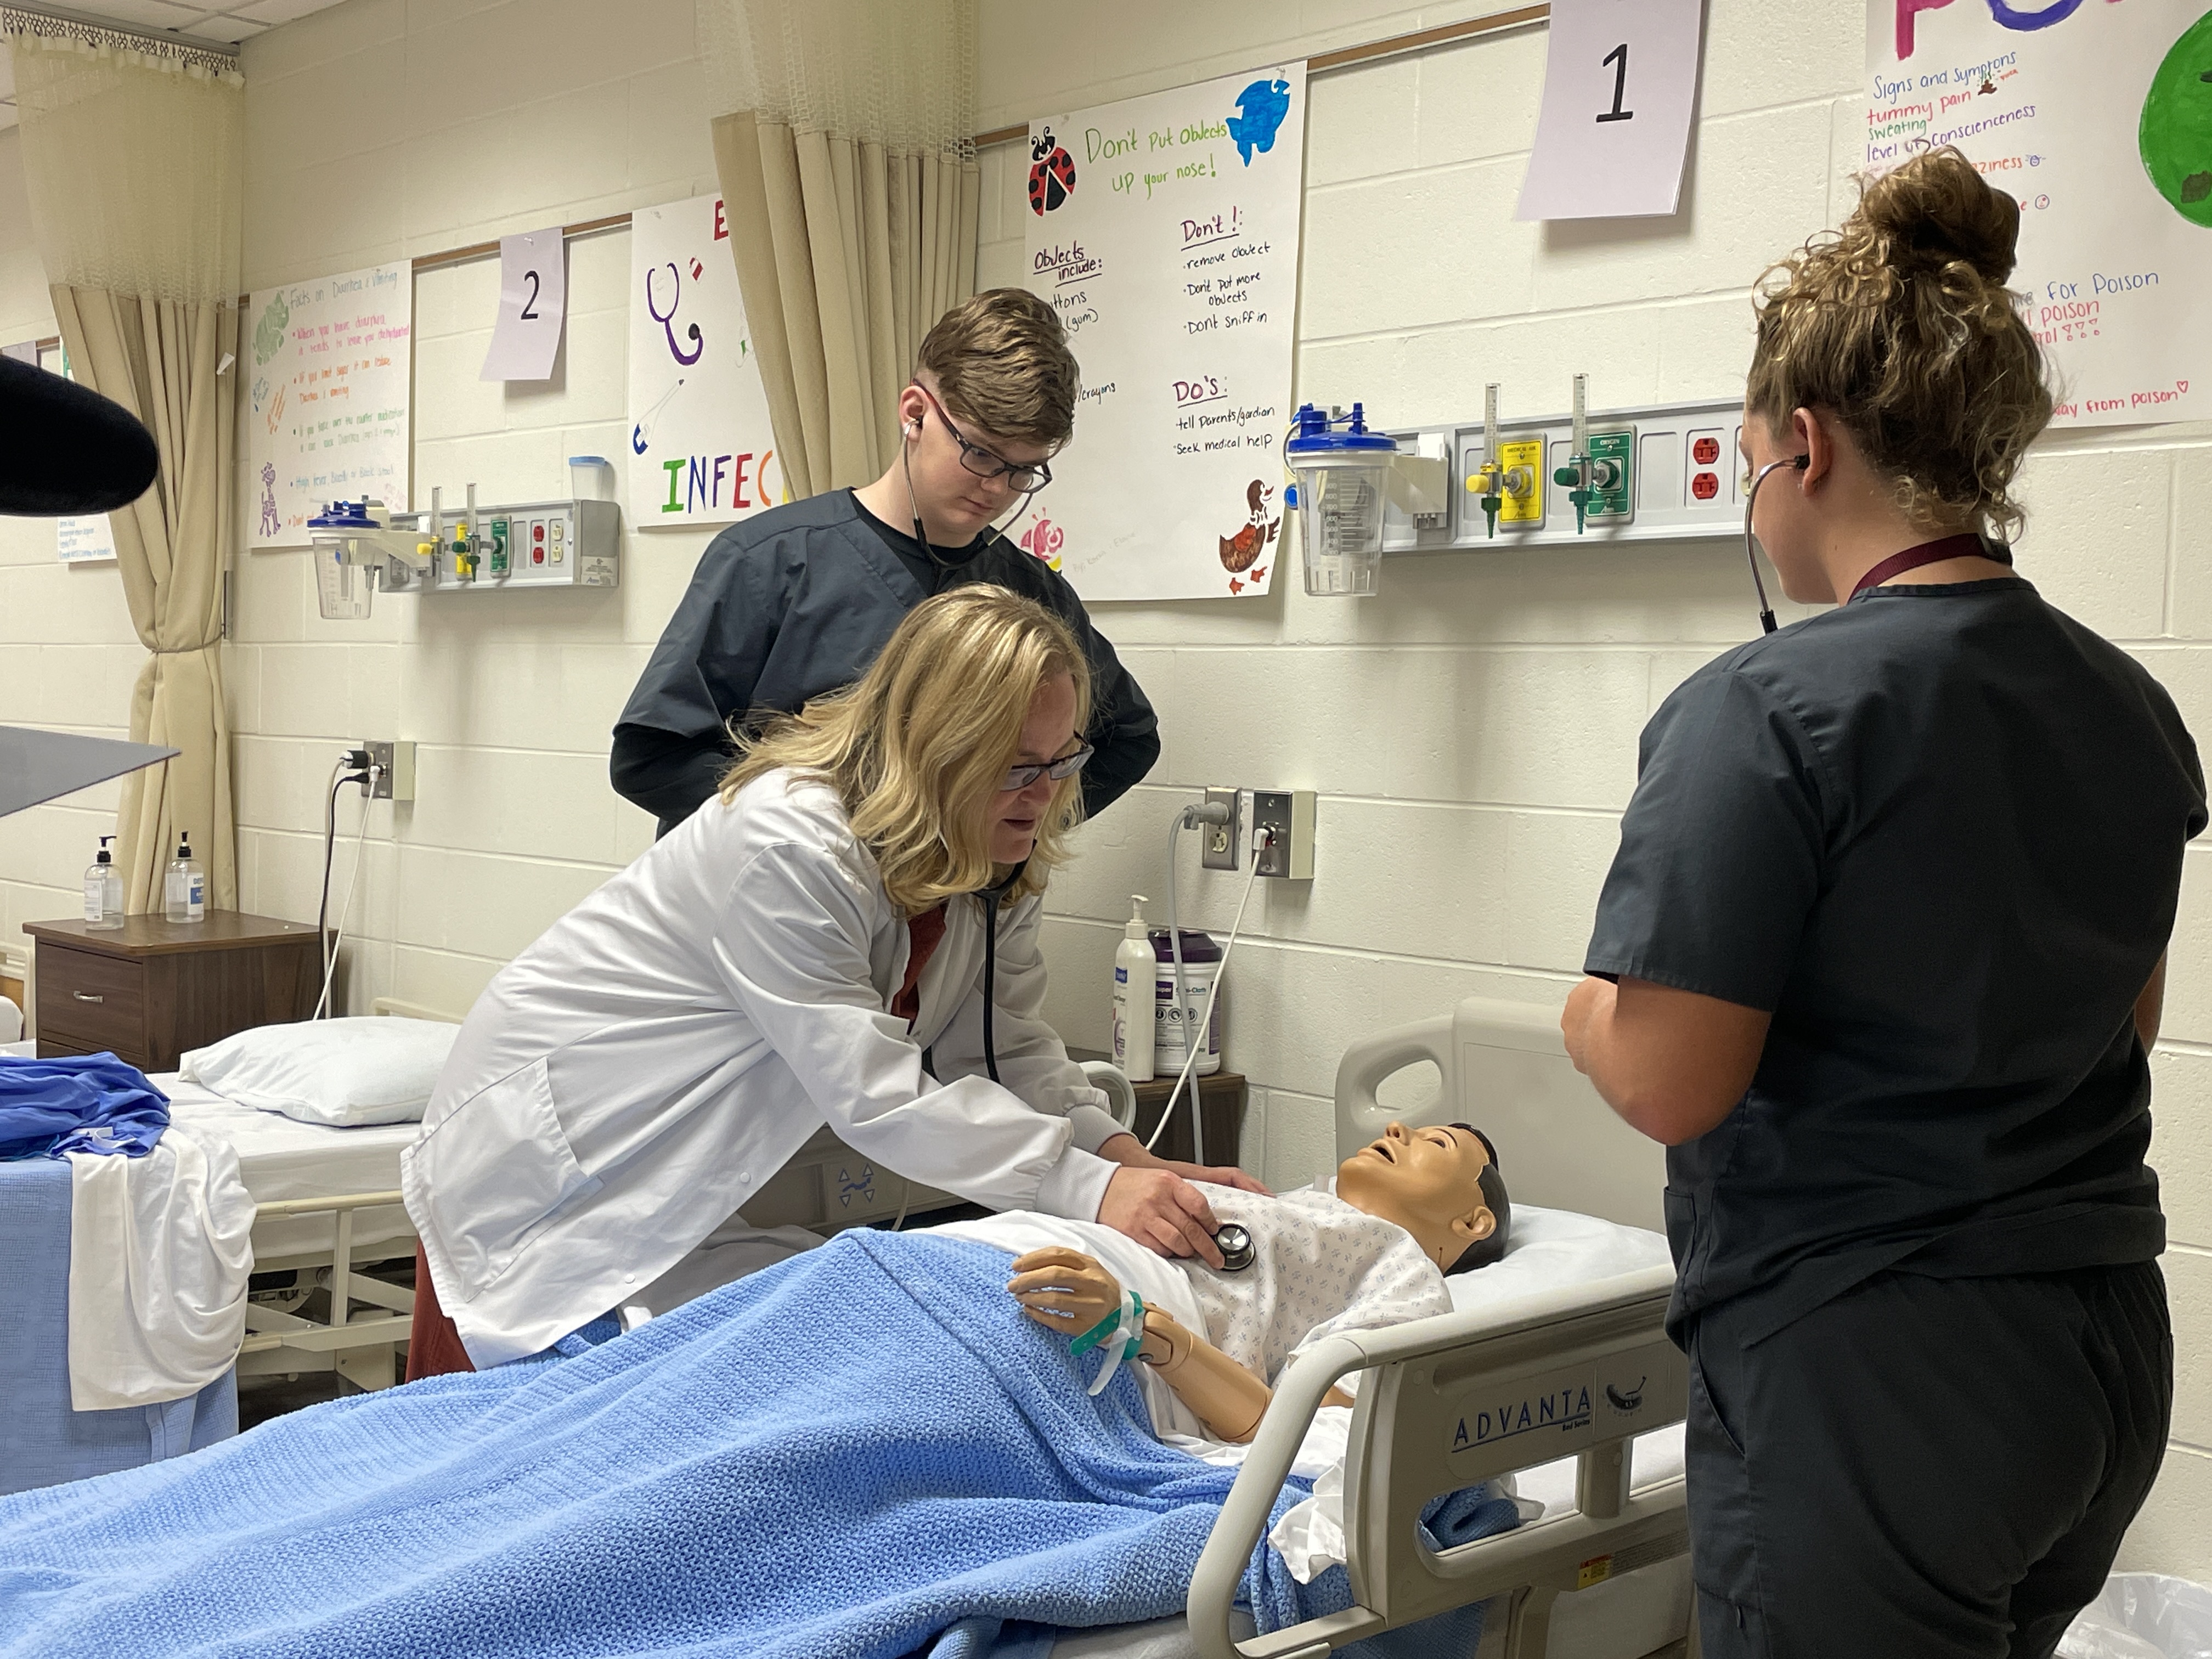 Two students are observing the instructor take vitals with her stethoscope.